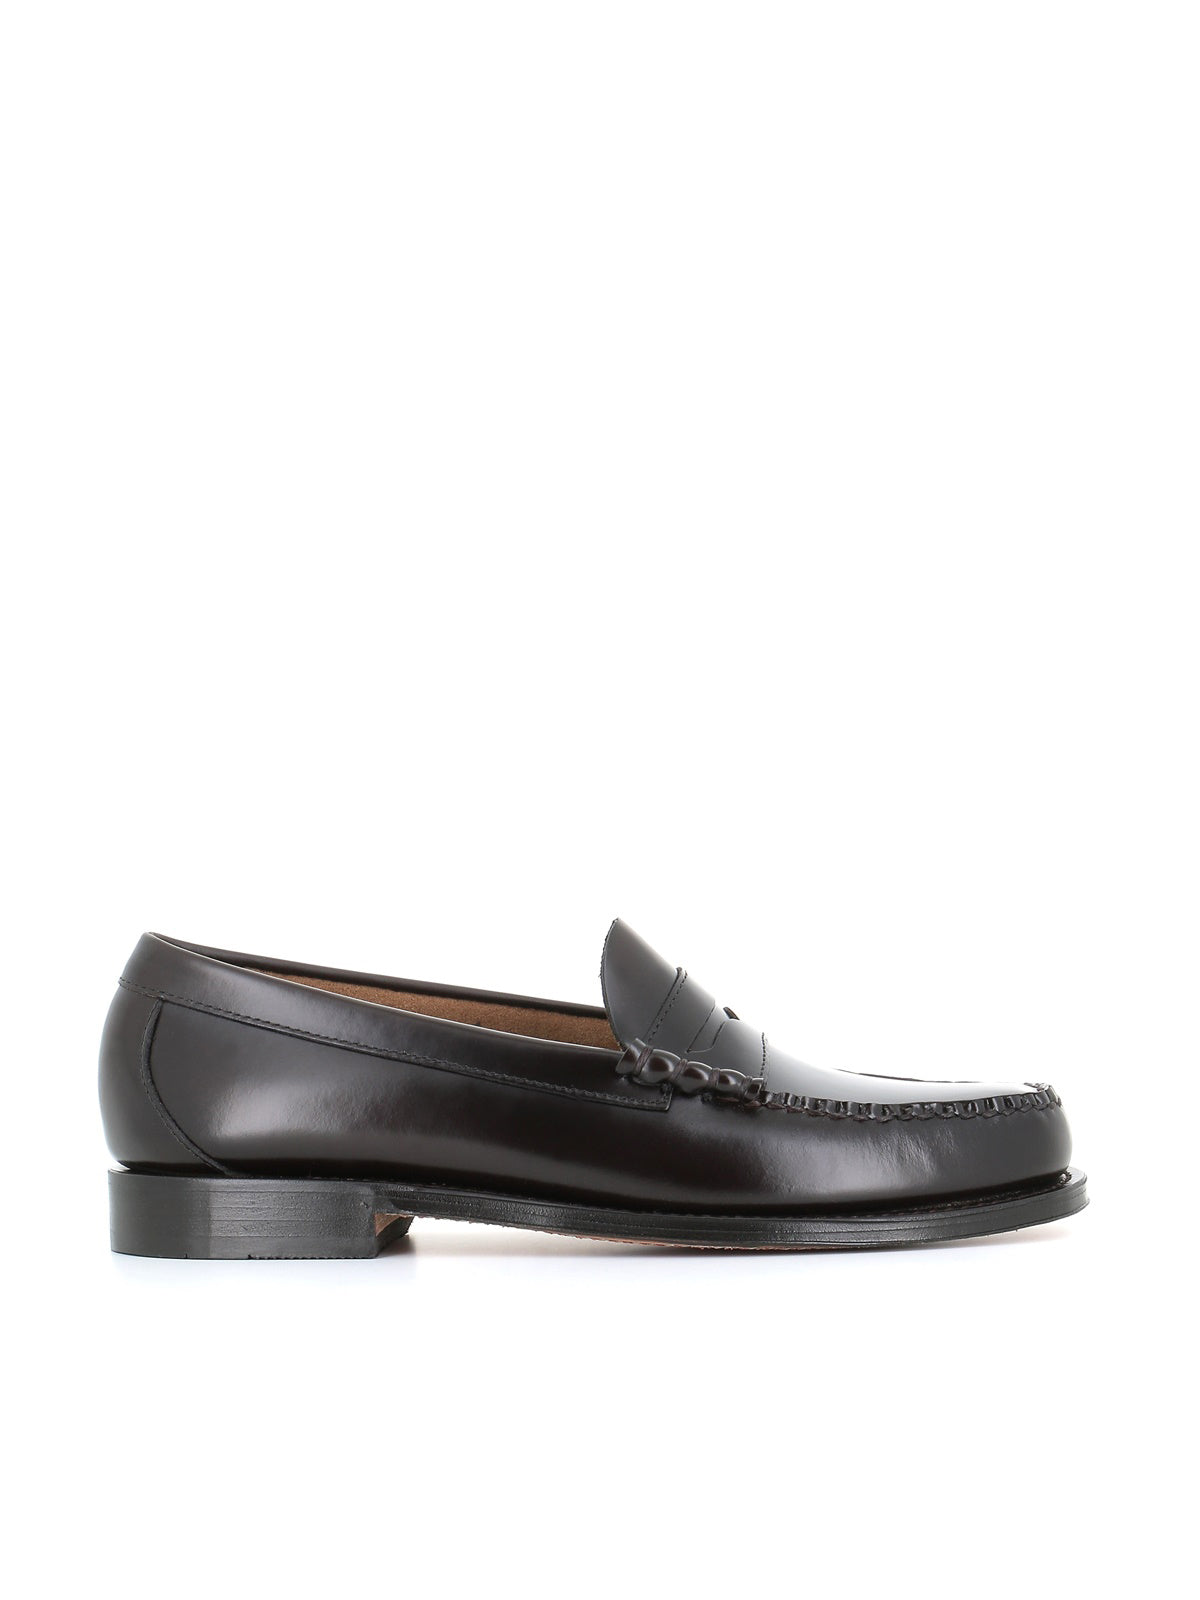  Loafer Larson Weejuns By G.h Bass & Co. Uomo Marrone - 1